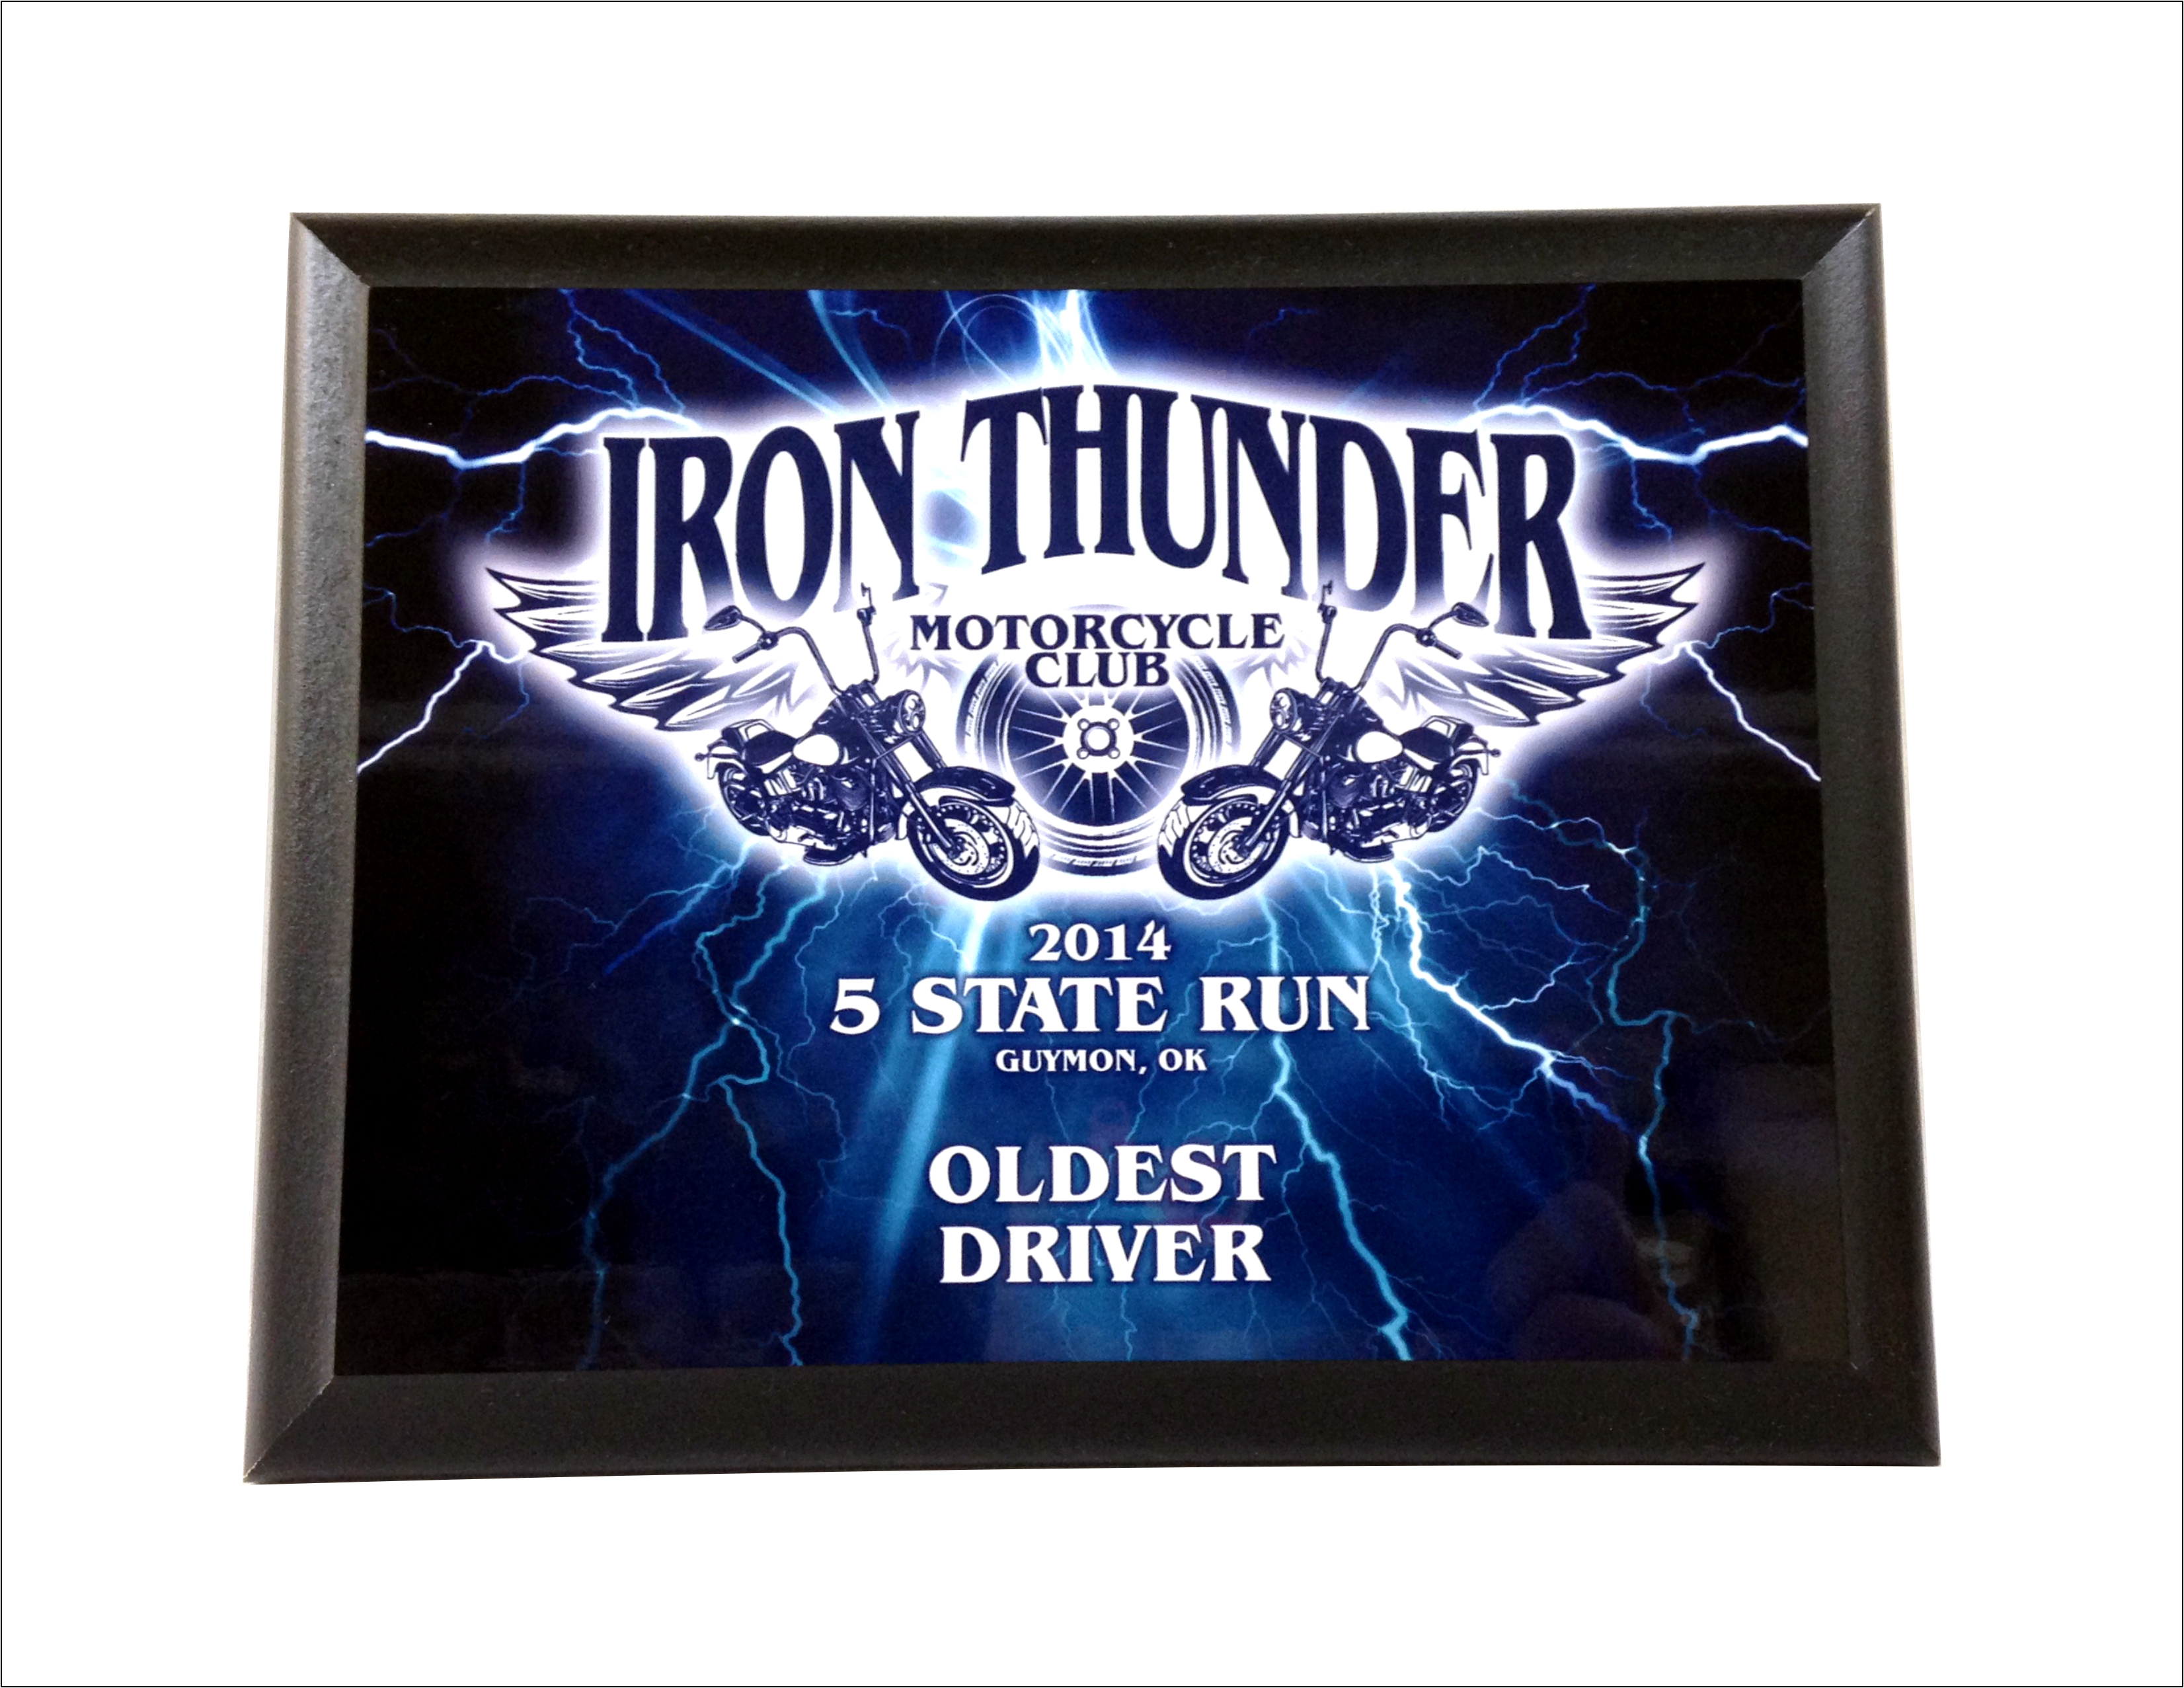 Iron Thunder made with sublimation printing